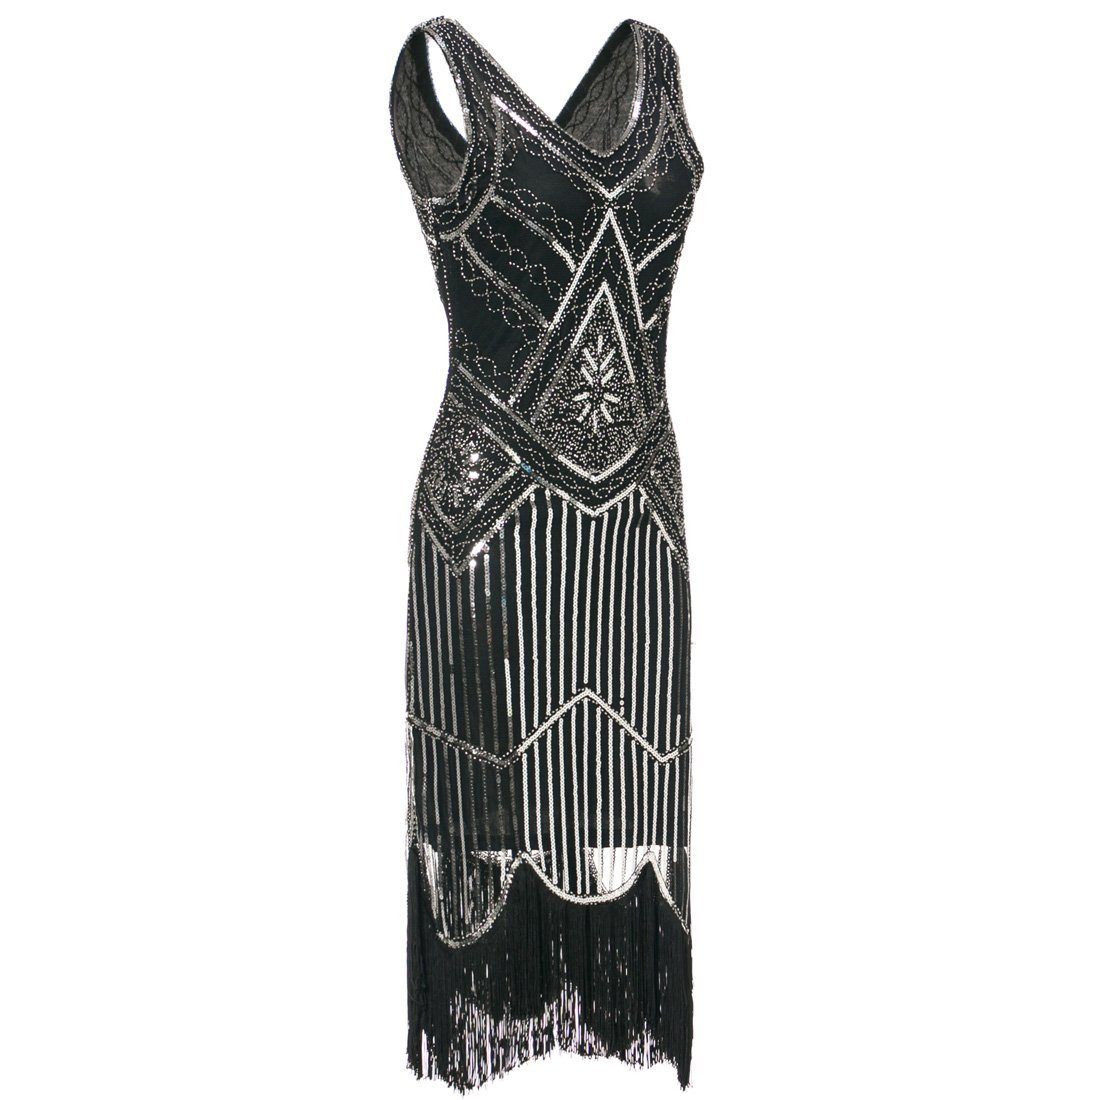 Silver Sequined 1920 Dresses Vintage 20s Inspired Great Gatsby Party ...